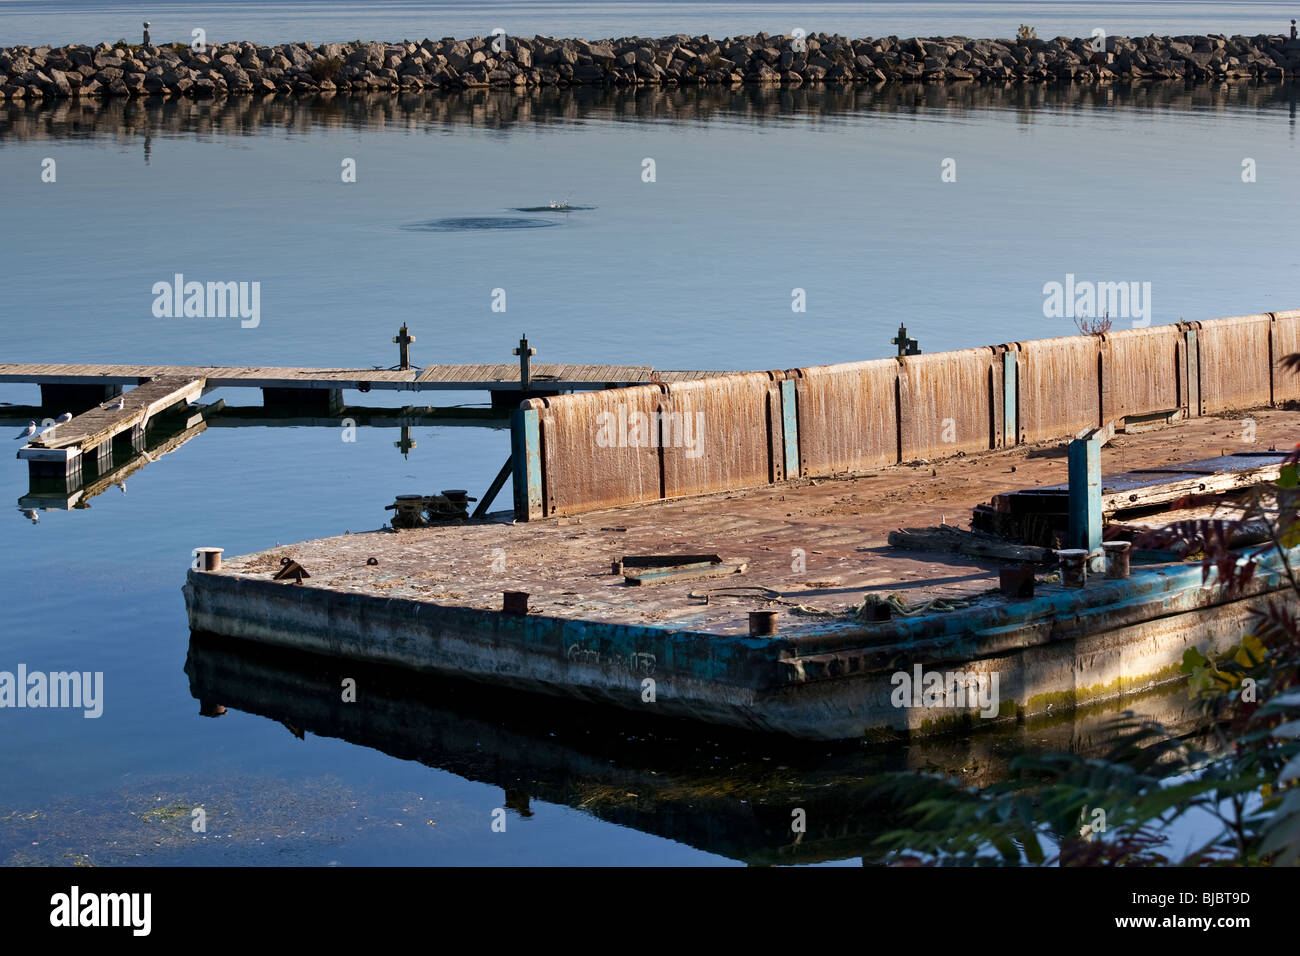 An old dilapidated marina platform, surrounded by still water, with a break wall in the background. Lake Ontario, Canada Stock Photo